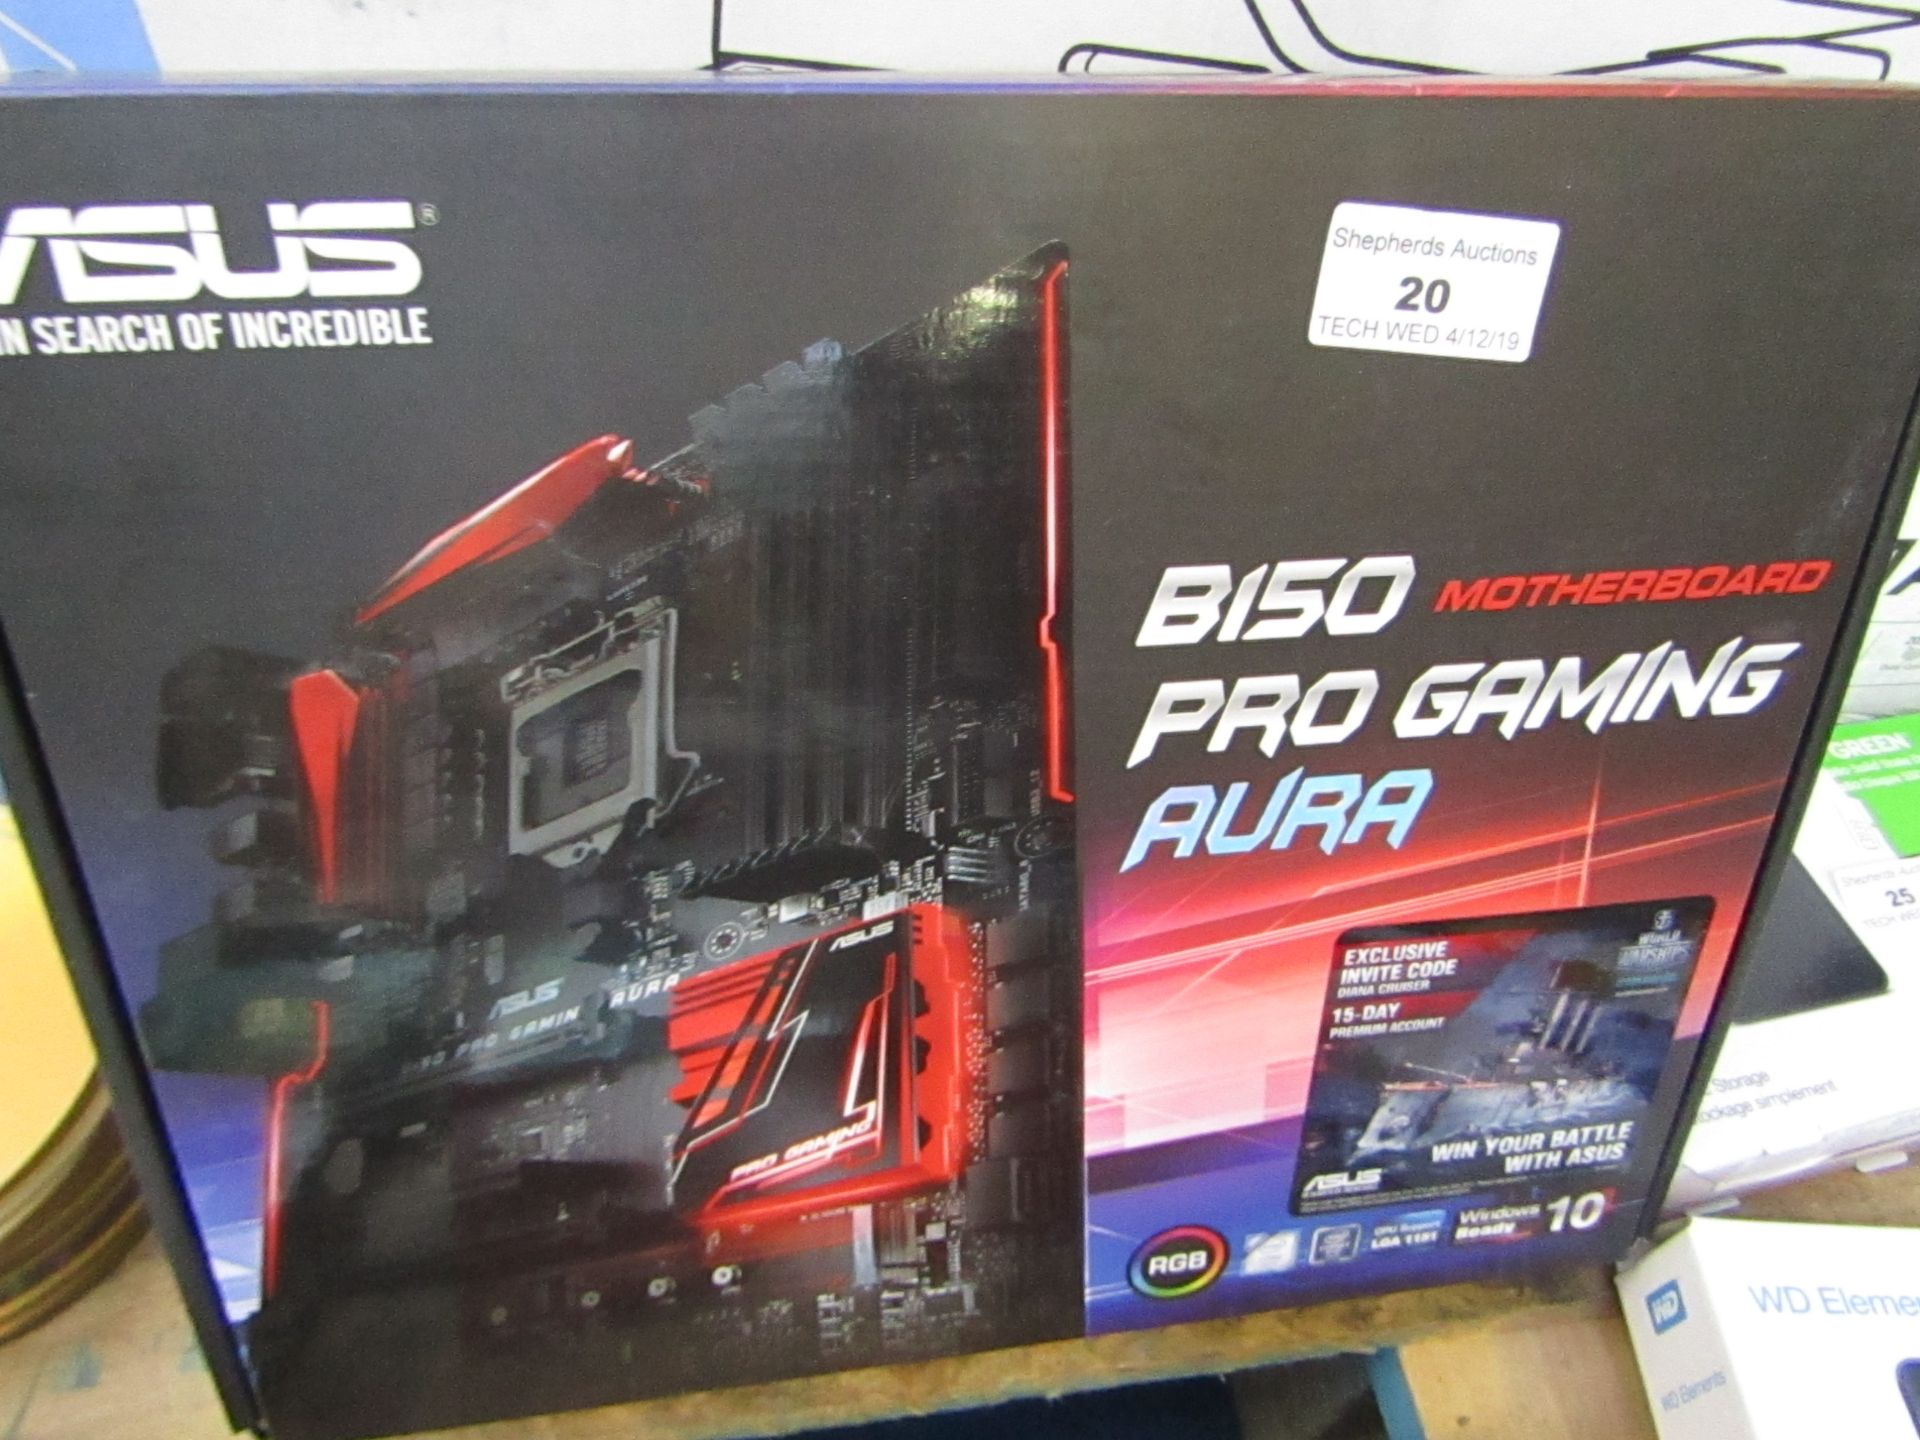 Asus B150 Pro gaming Aura Mouthe board, boxed and unchecked, RRP £190